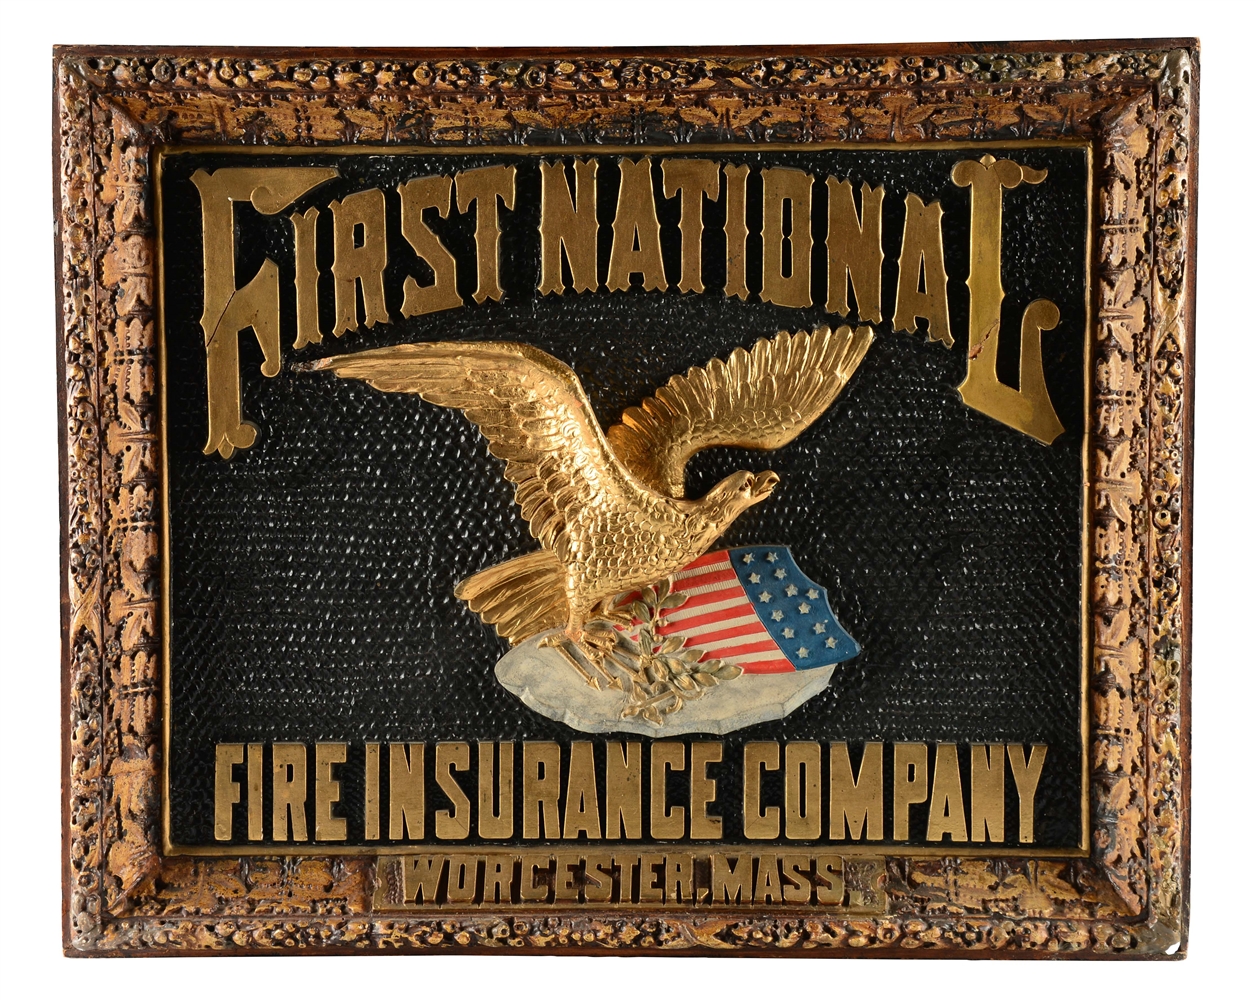 FIRST NATIONAL FIRE INSURANCE COMPANY ADVERTISING SIGN.